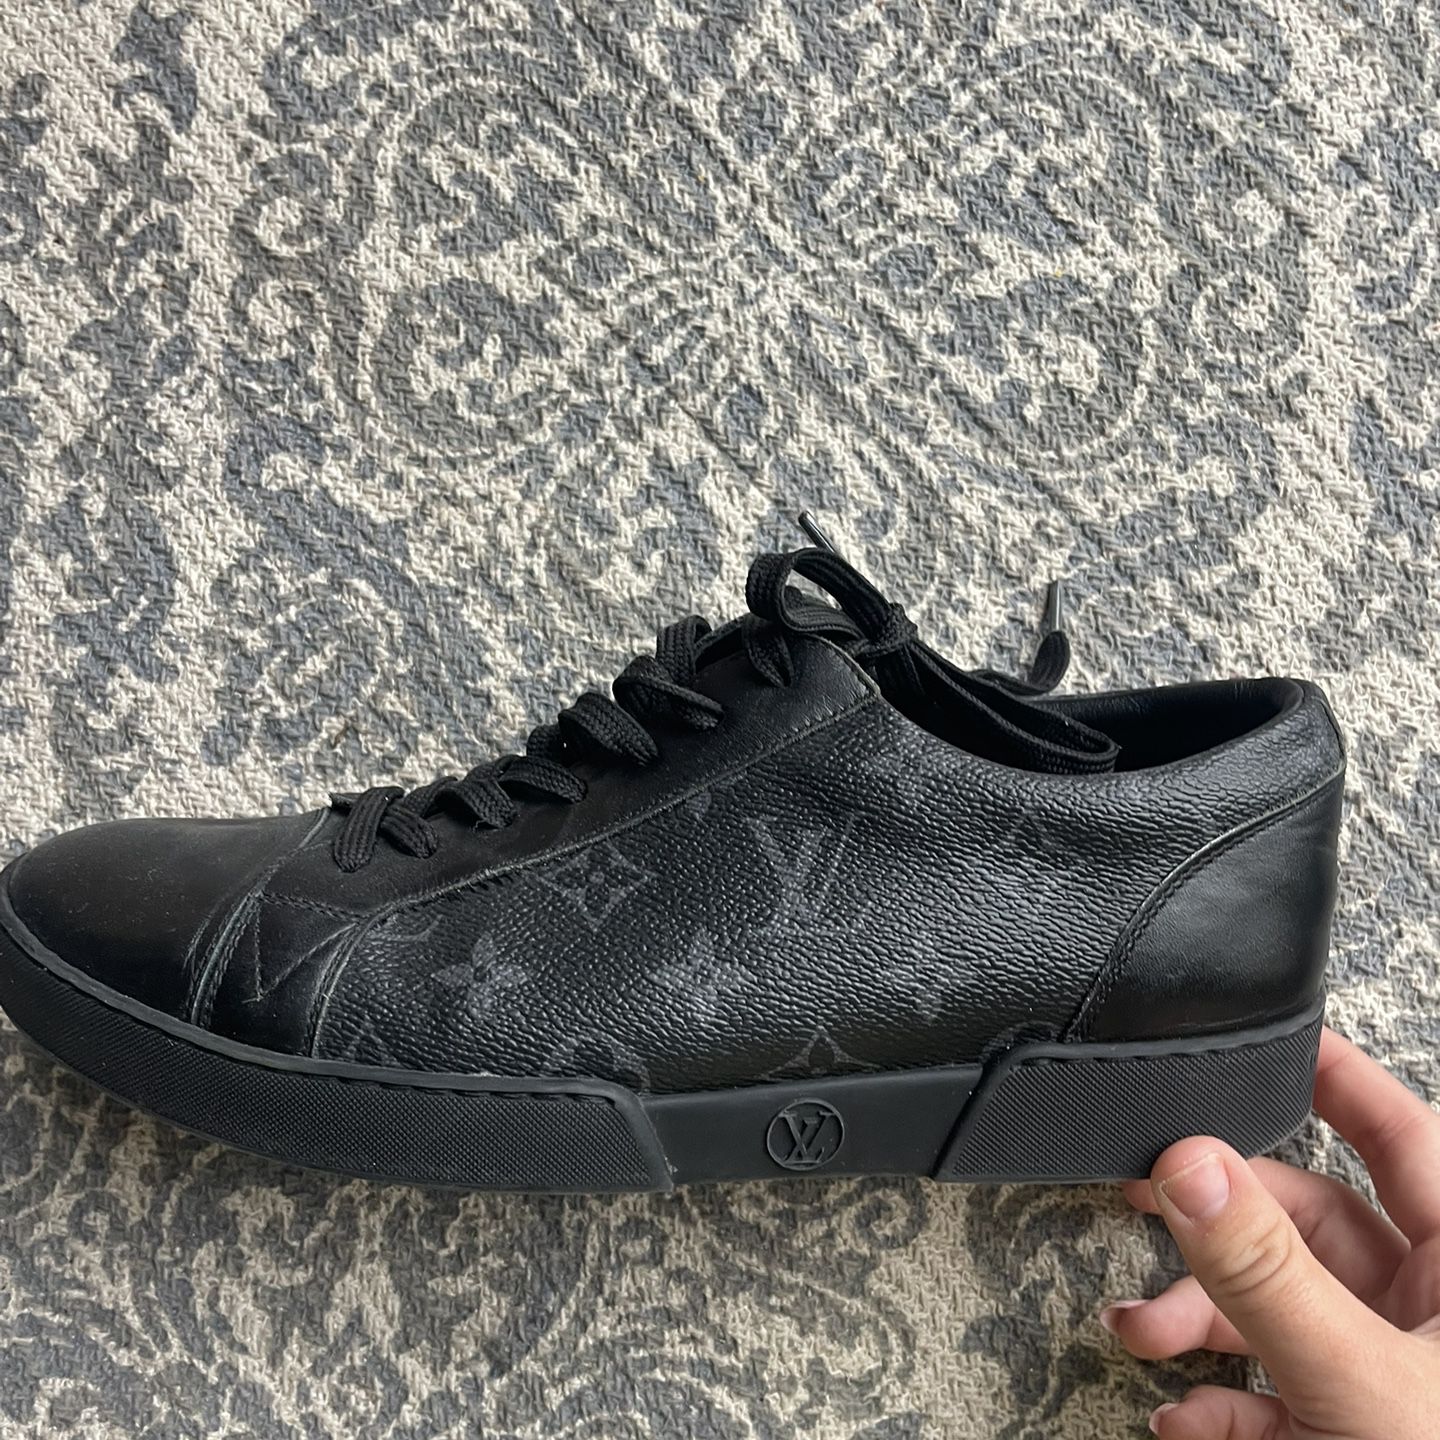 Louis Vuitton Mens Shoes Size 9 for Sale in Miami, FL - OfferUp